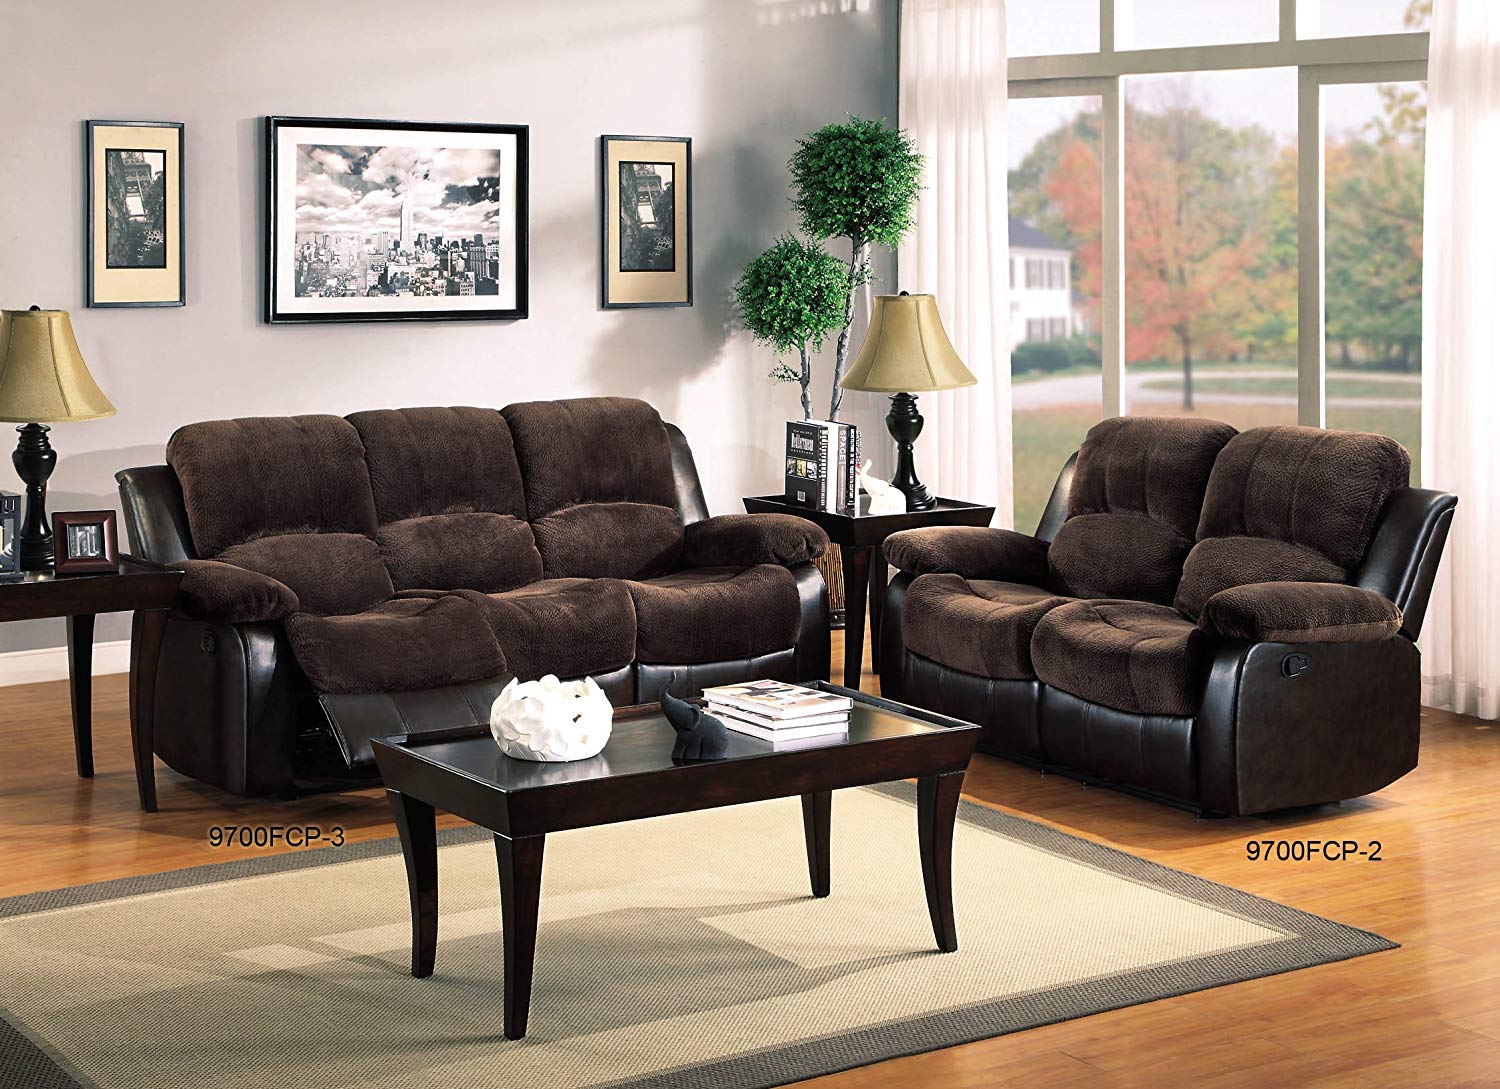 Best Quality Recliners